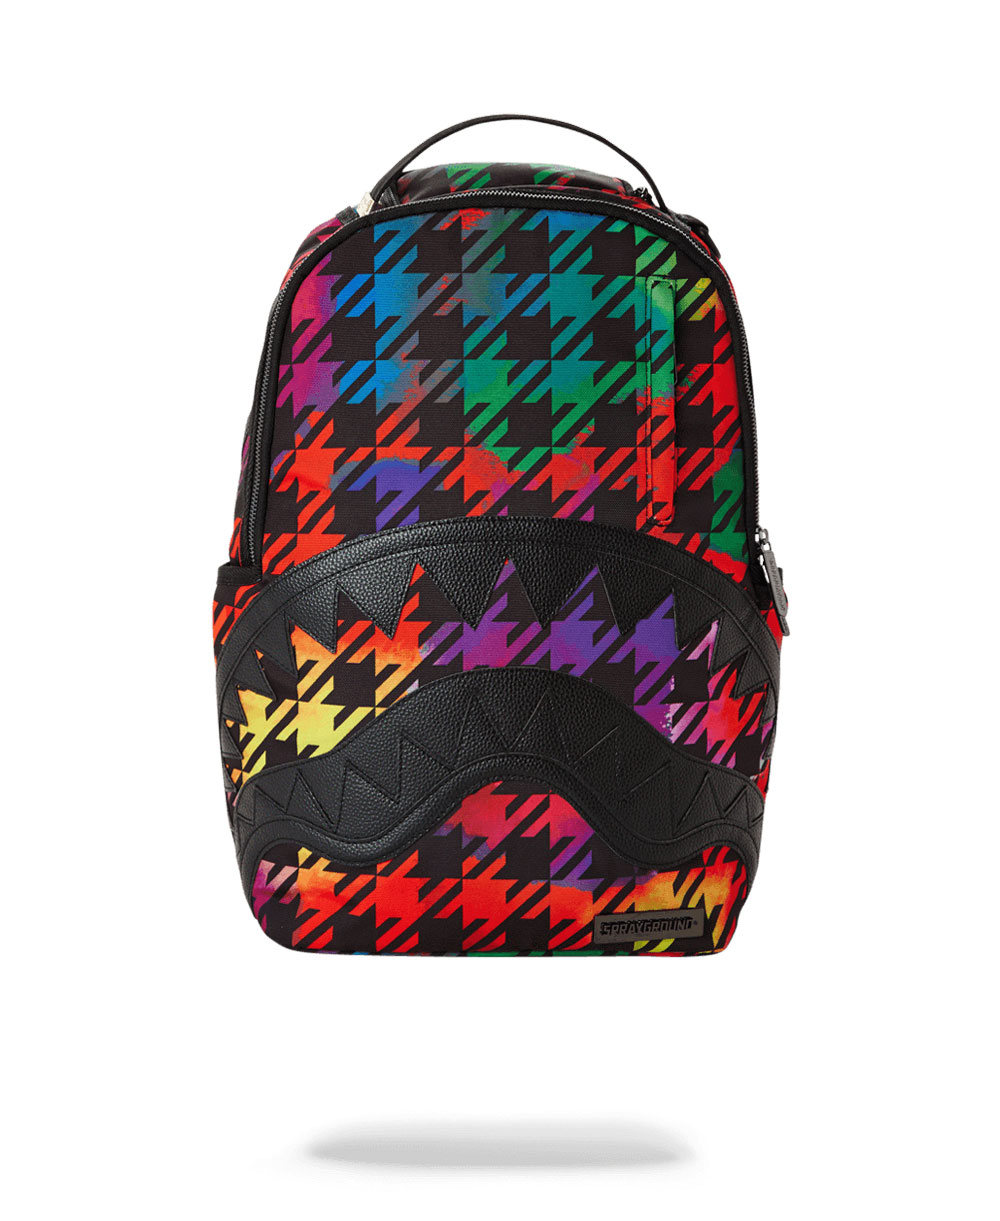 The London Backpack 